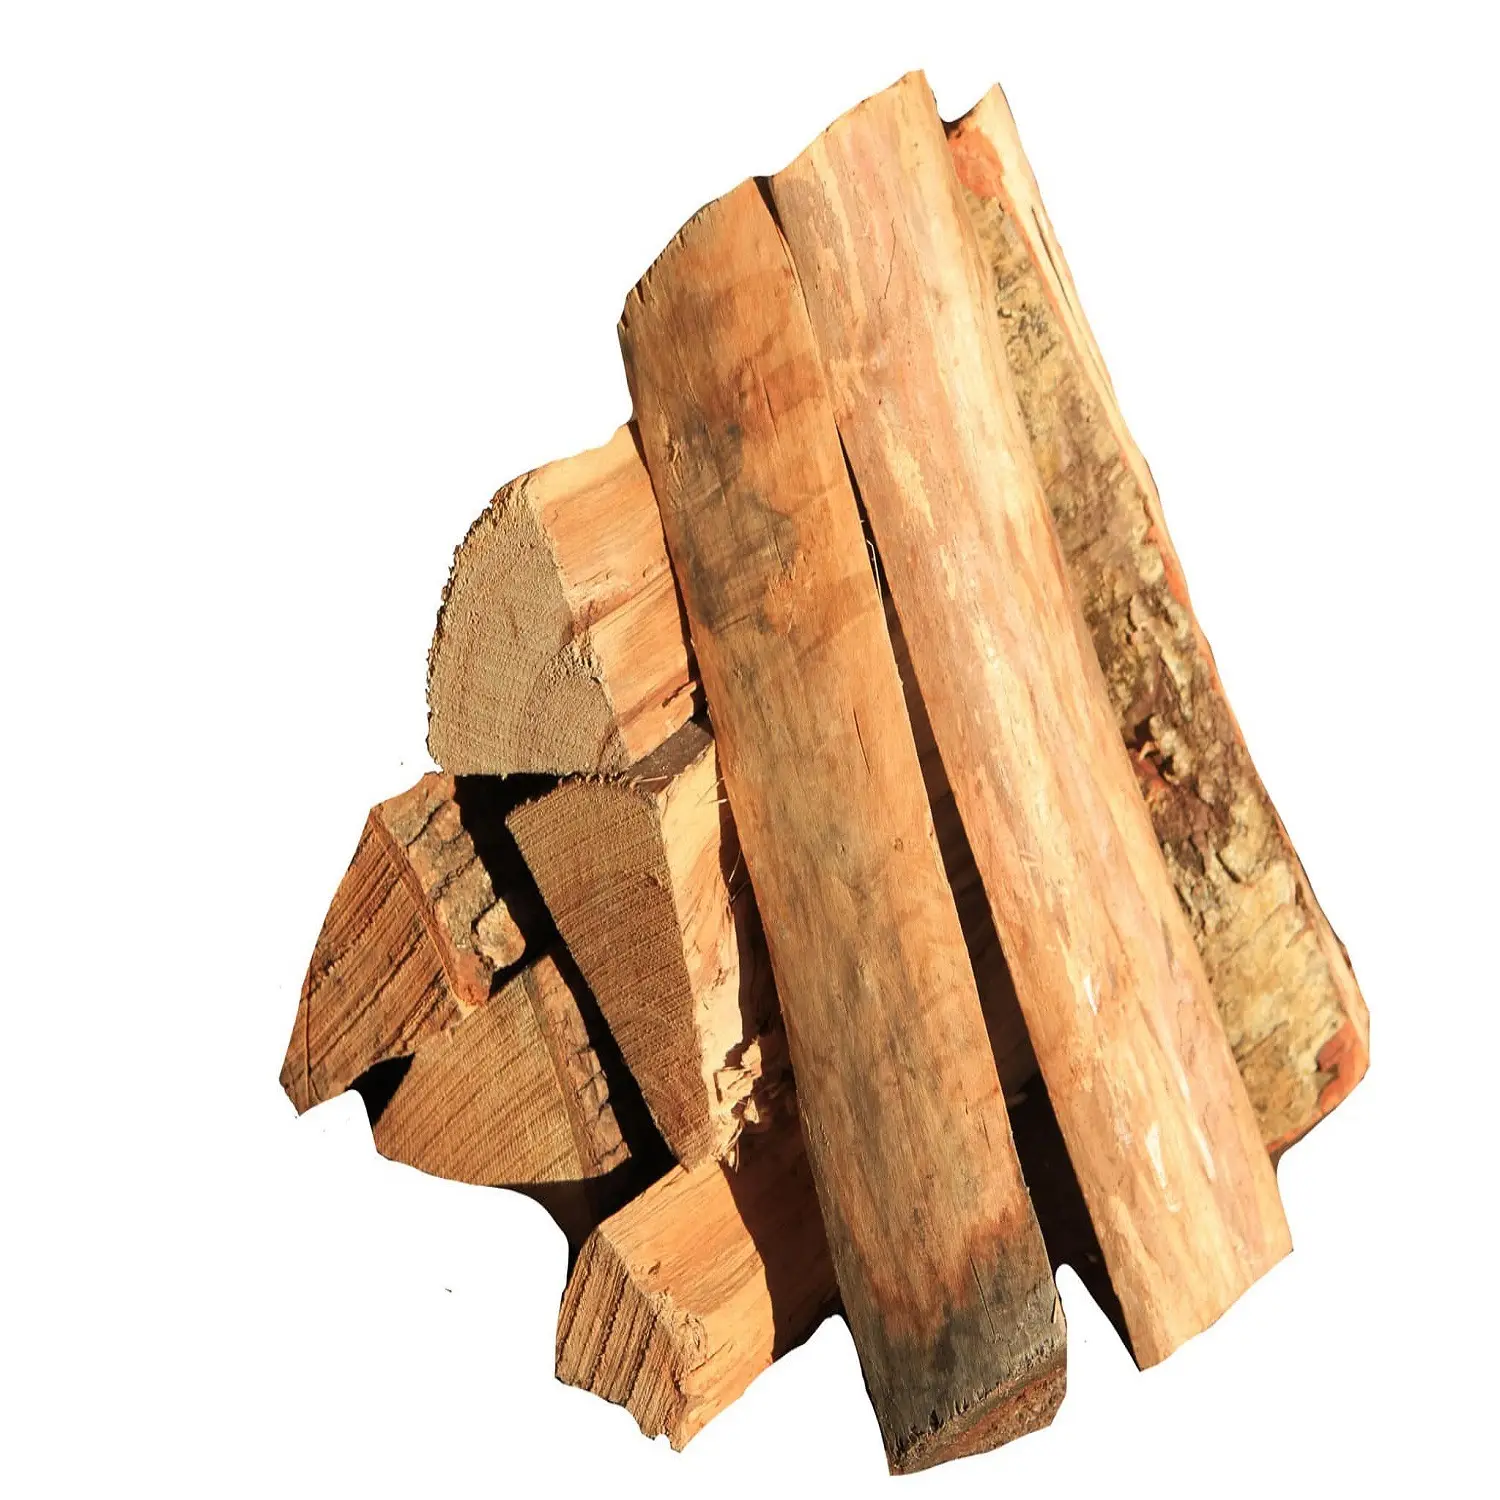 Pine wood chips/ Eucalyptus pulp wood chip/ Germany woodchips Firewood